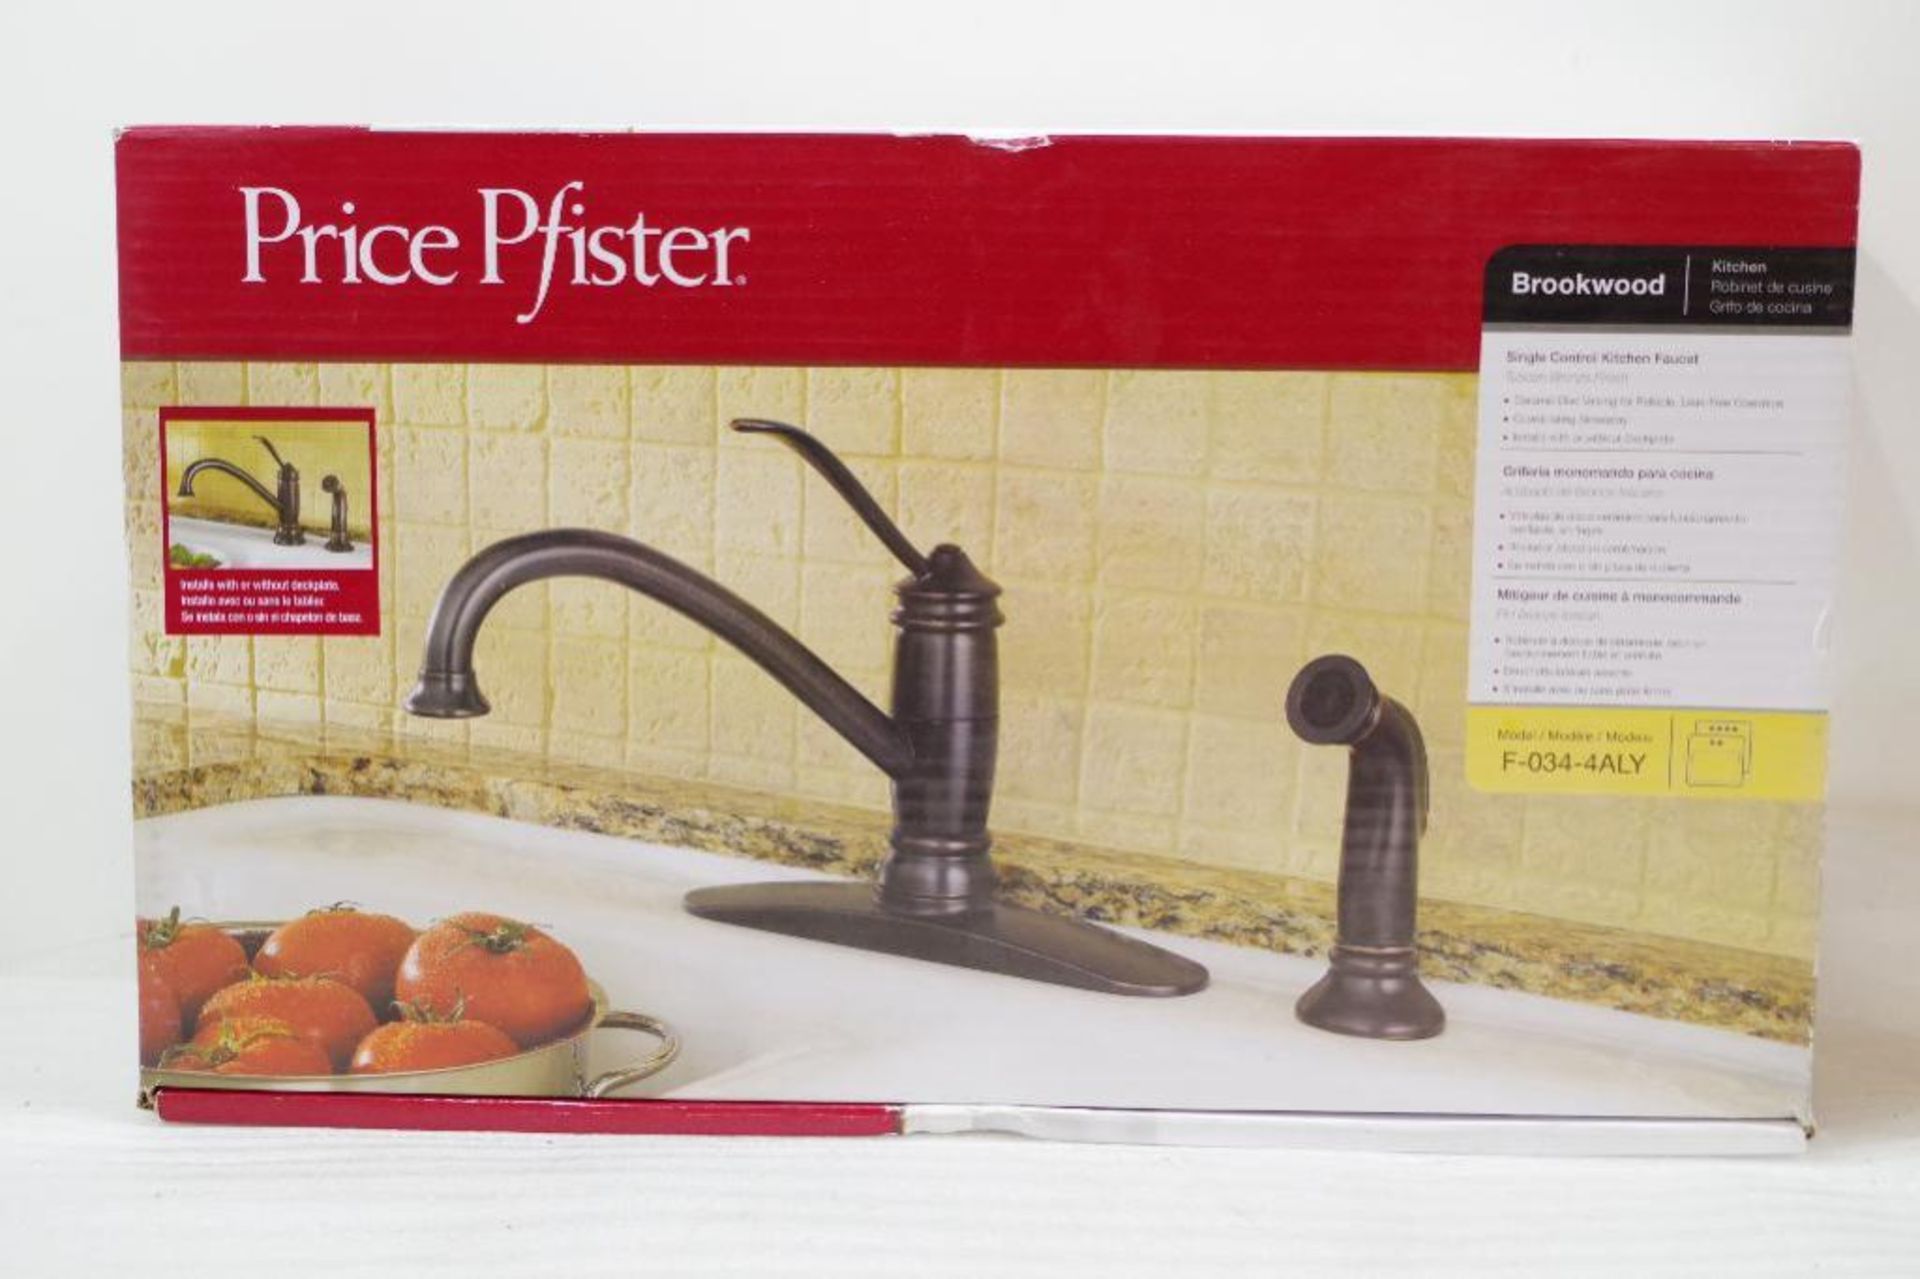 NEW PRICE PFISTER BROOKWOOD Kitchen Faucet, Tuscan Bronze Finish - Image 2 of 4